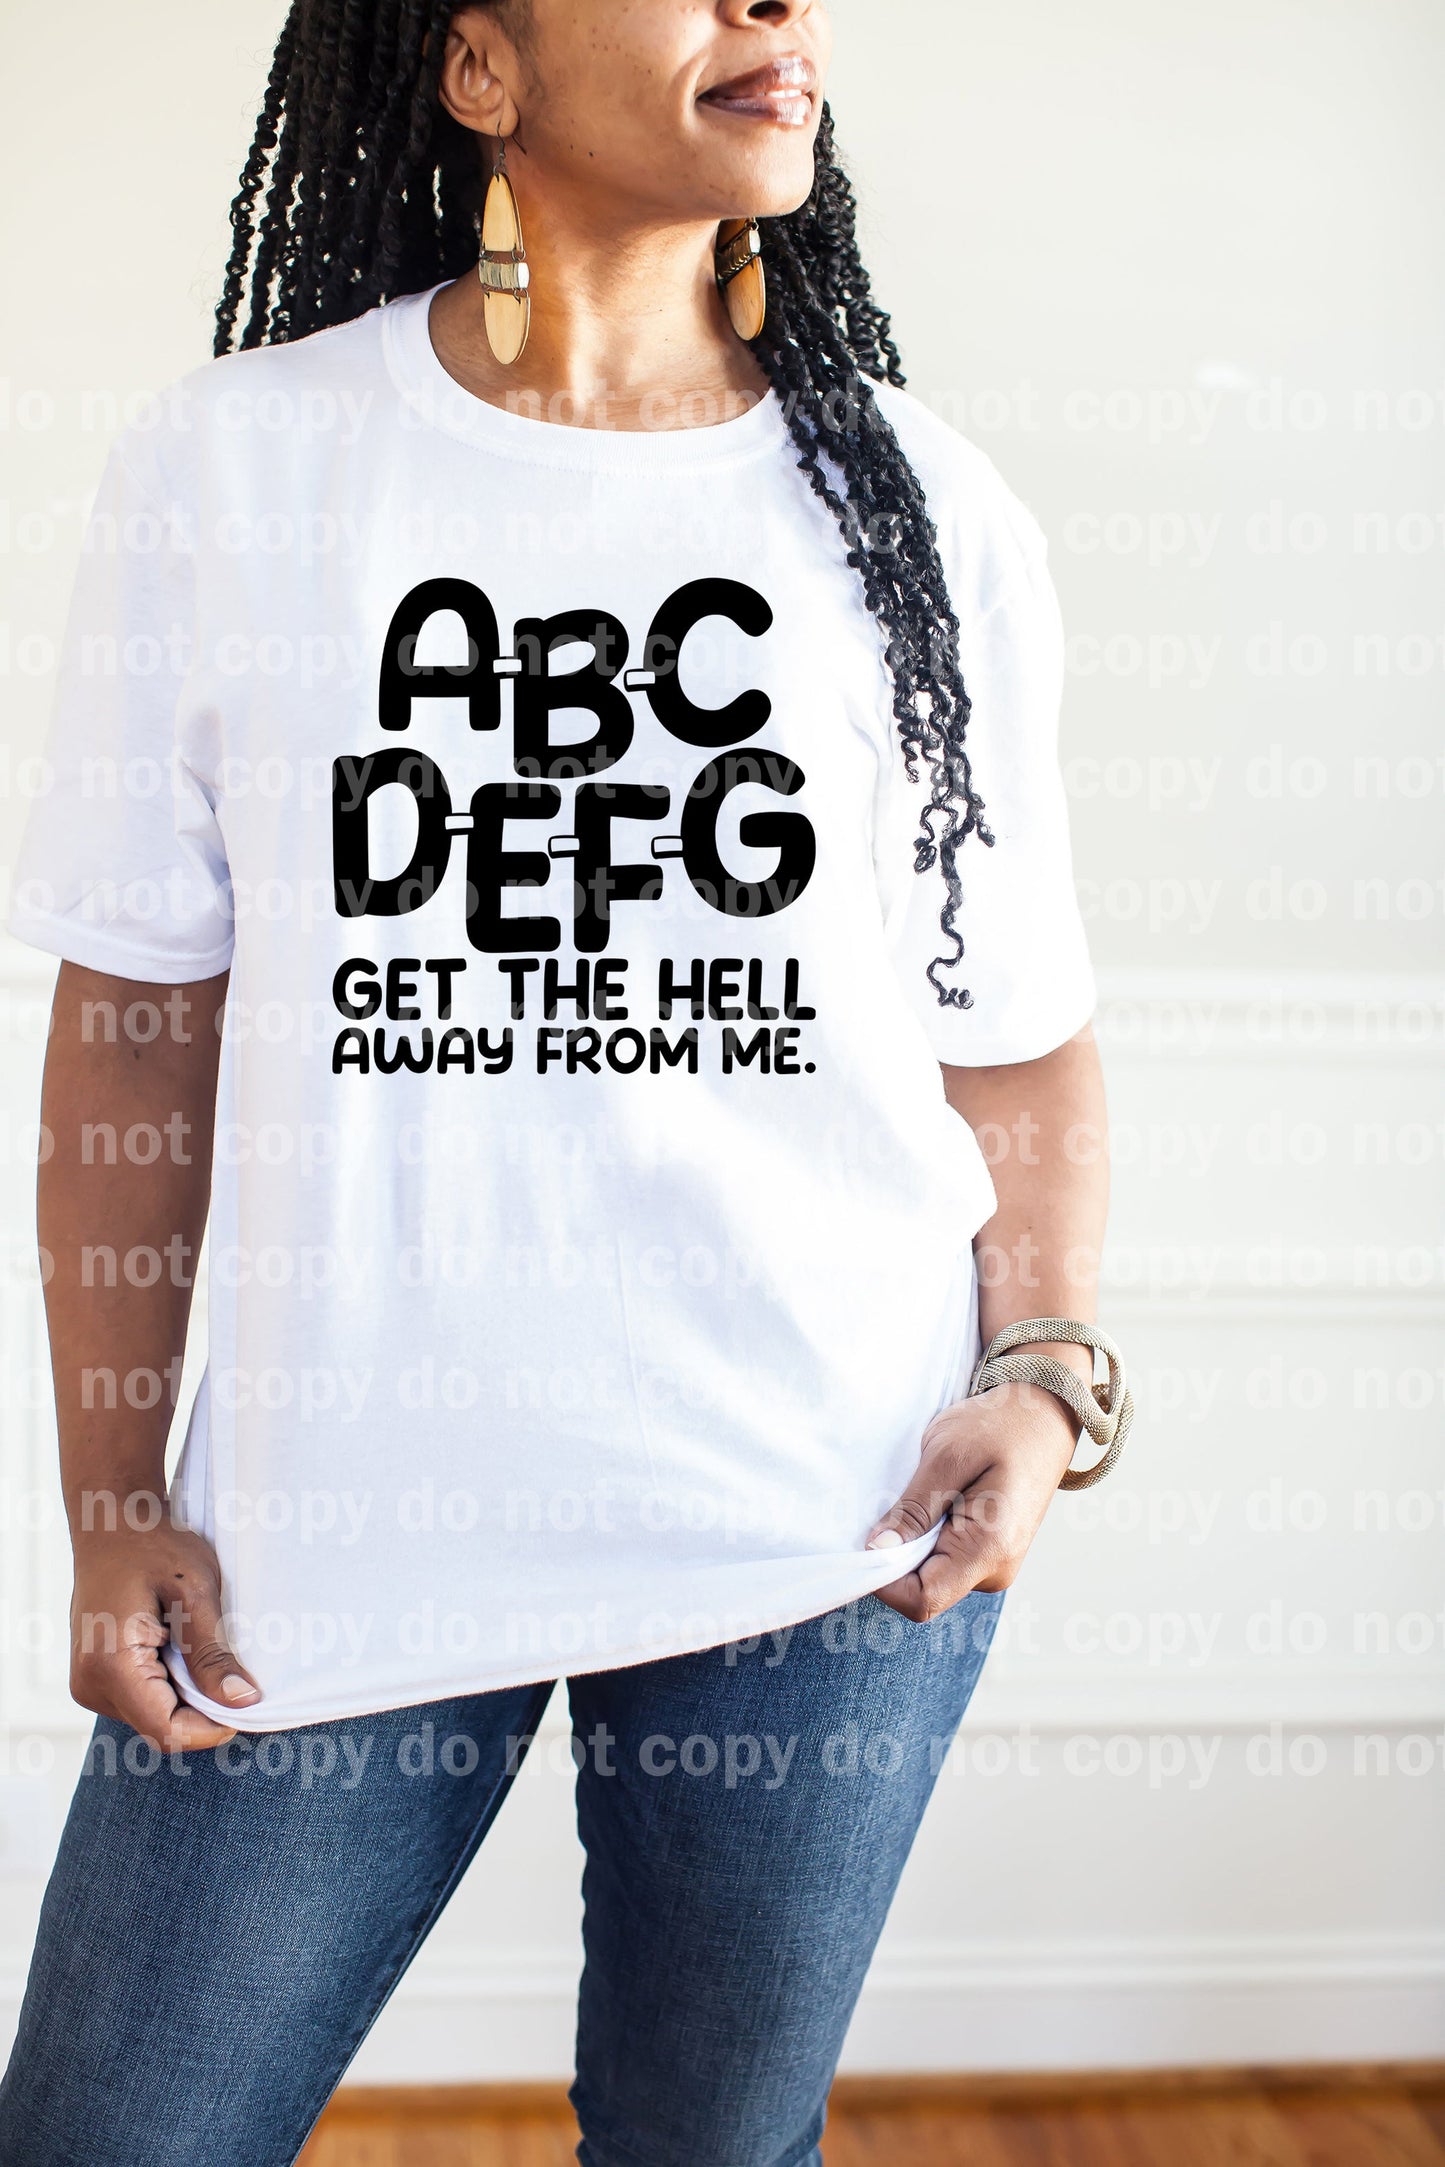 A B C D E F G Get The Hell Away From Me Dream Print or Sublimation Print